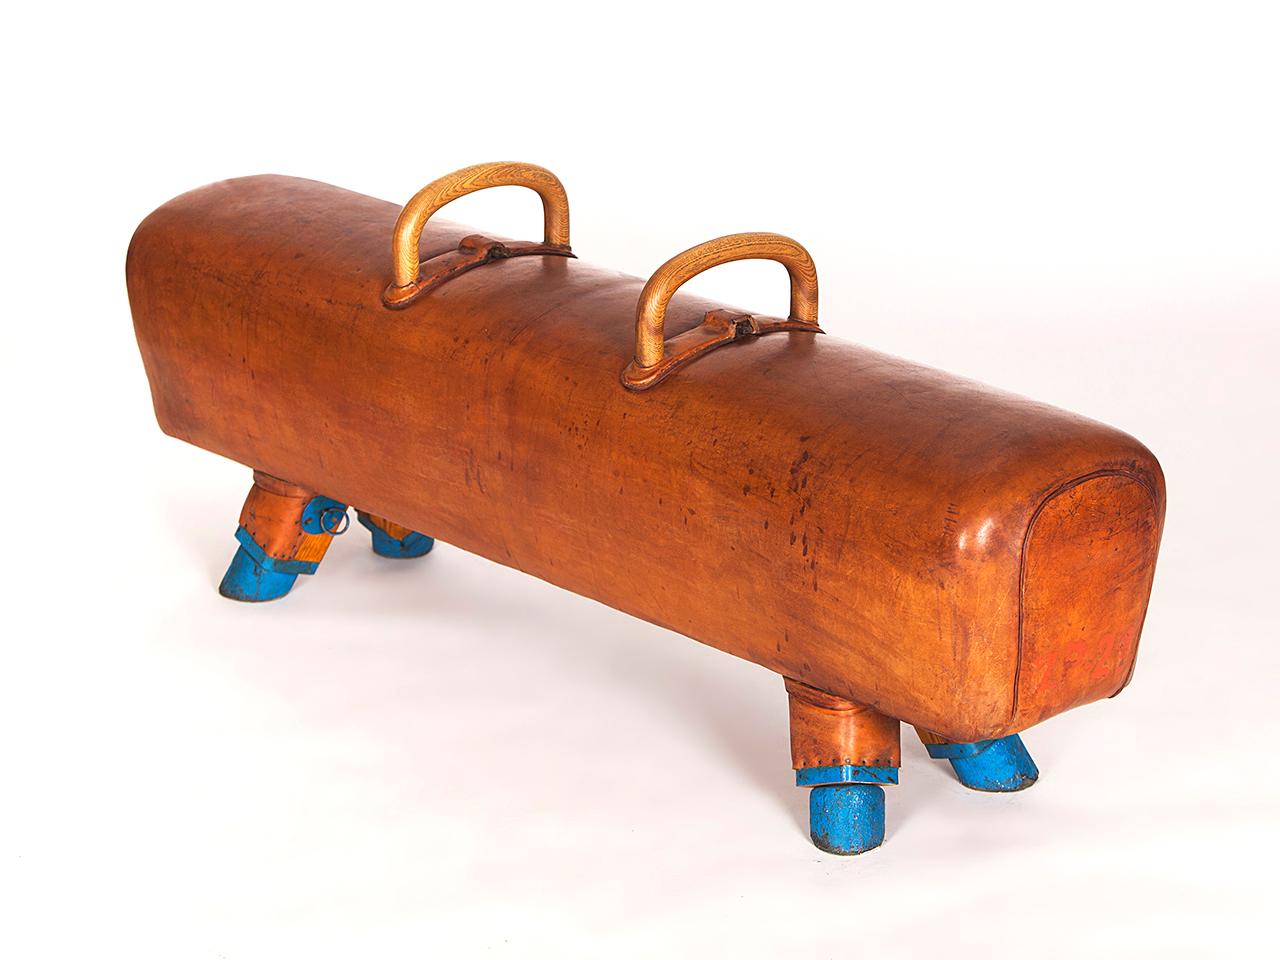 Pommel horse from former Czechoslovakia. The legs were cut to a height of 53cm. The handles can be removed for comfortable seating. The wooden handles were restored. The thick leather has been cleaned and the patina was retained. Very good vintage